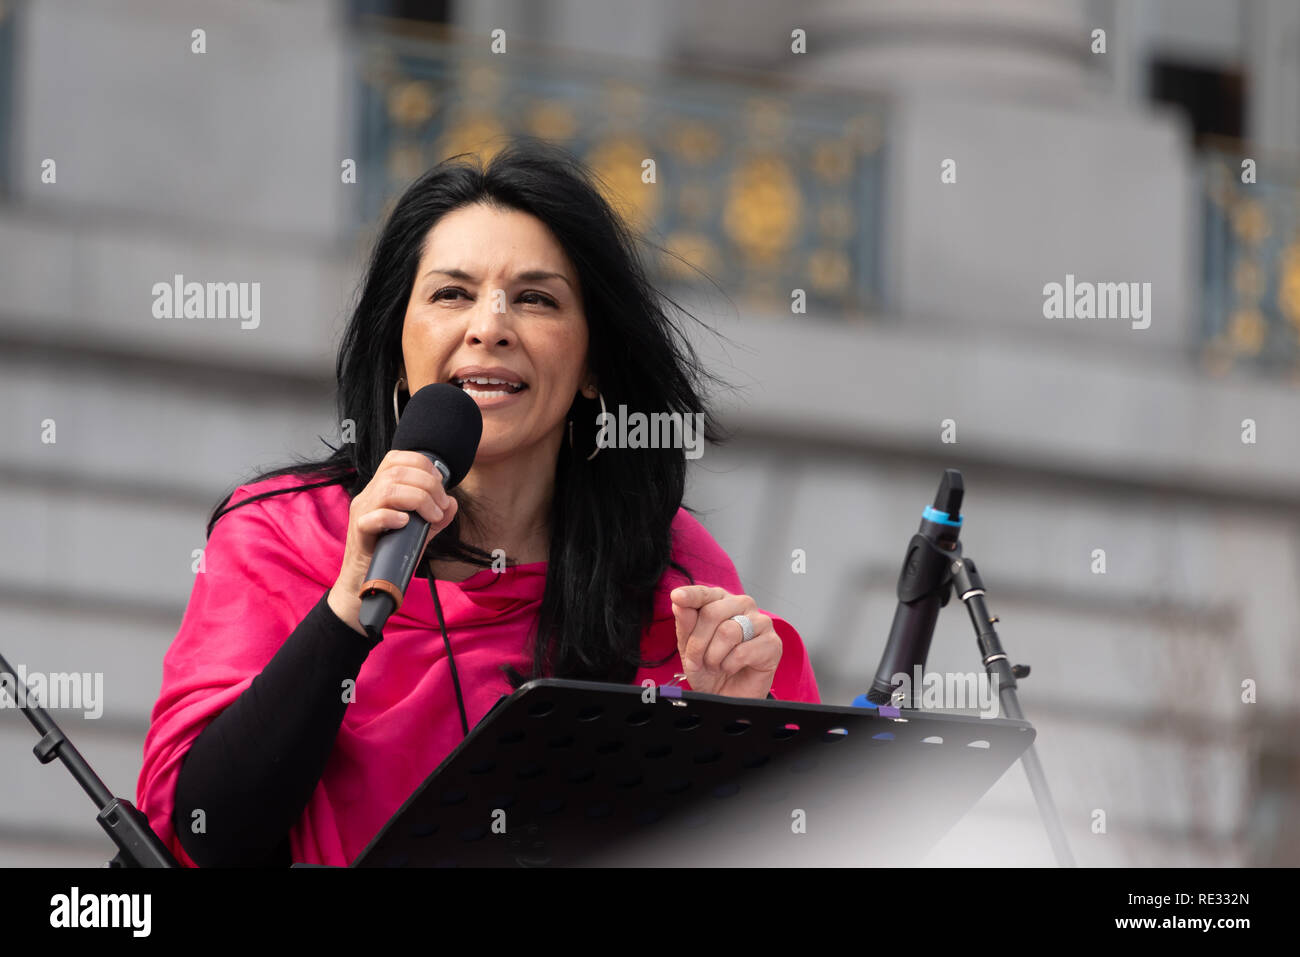 San Francisco, USA. 19th January, 2019. The Women's March San Francisco begins with a rally at Civic Center Plaza in front of City Hall. Plaza. Gilda Gonzales, CEO of Planned Parenthood NorCal (Northern California) addresses the audience. Credit: Shelly Rivoli/Alamy Live News Stock Photo